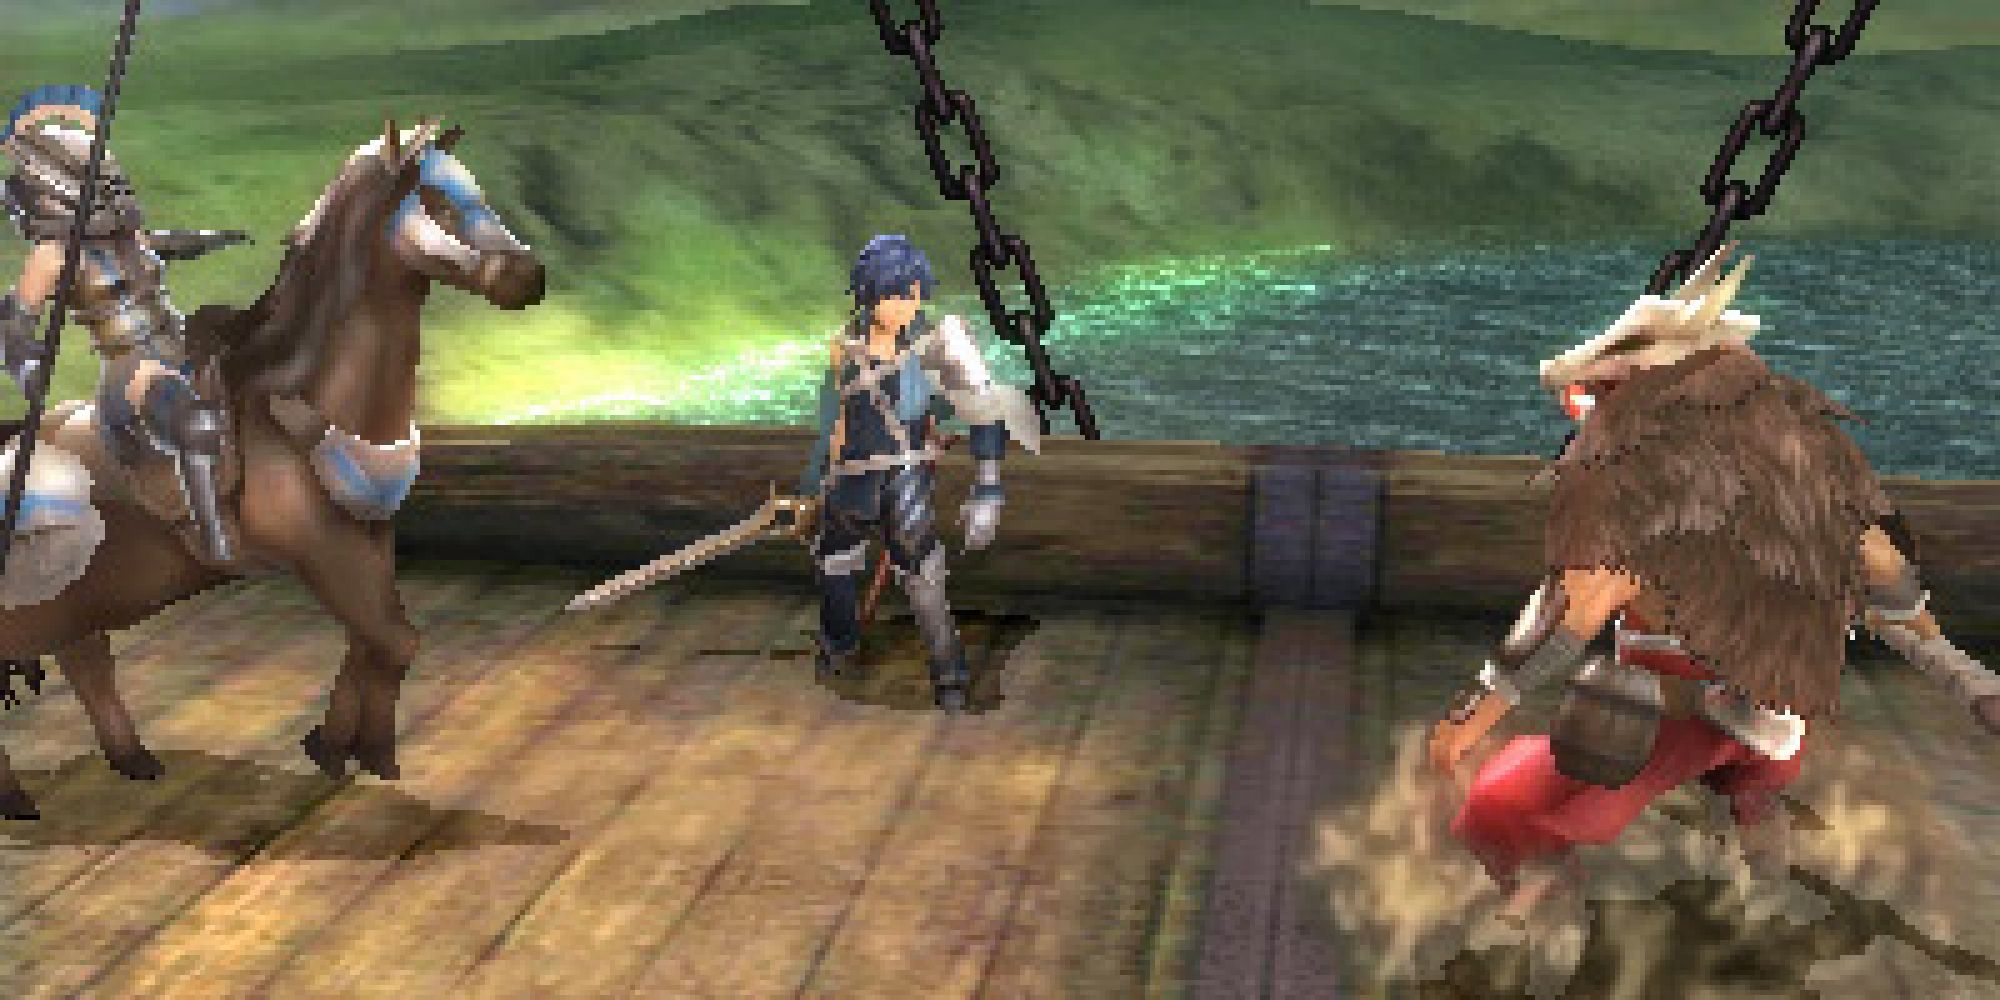 Chrom in battle with a barbarian in Fire Emblem Awakening